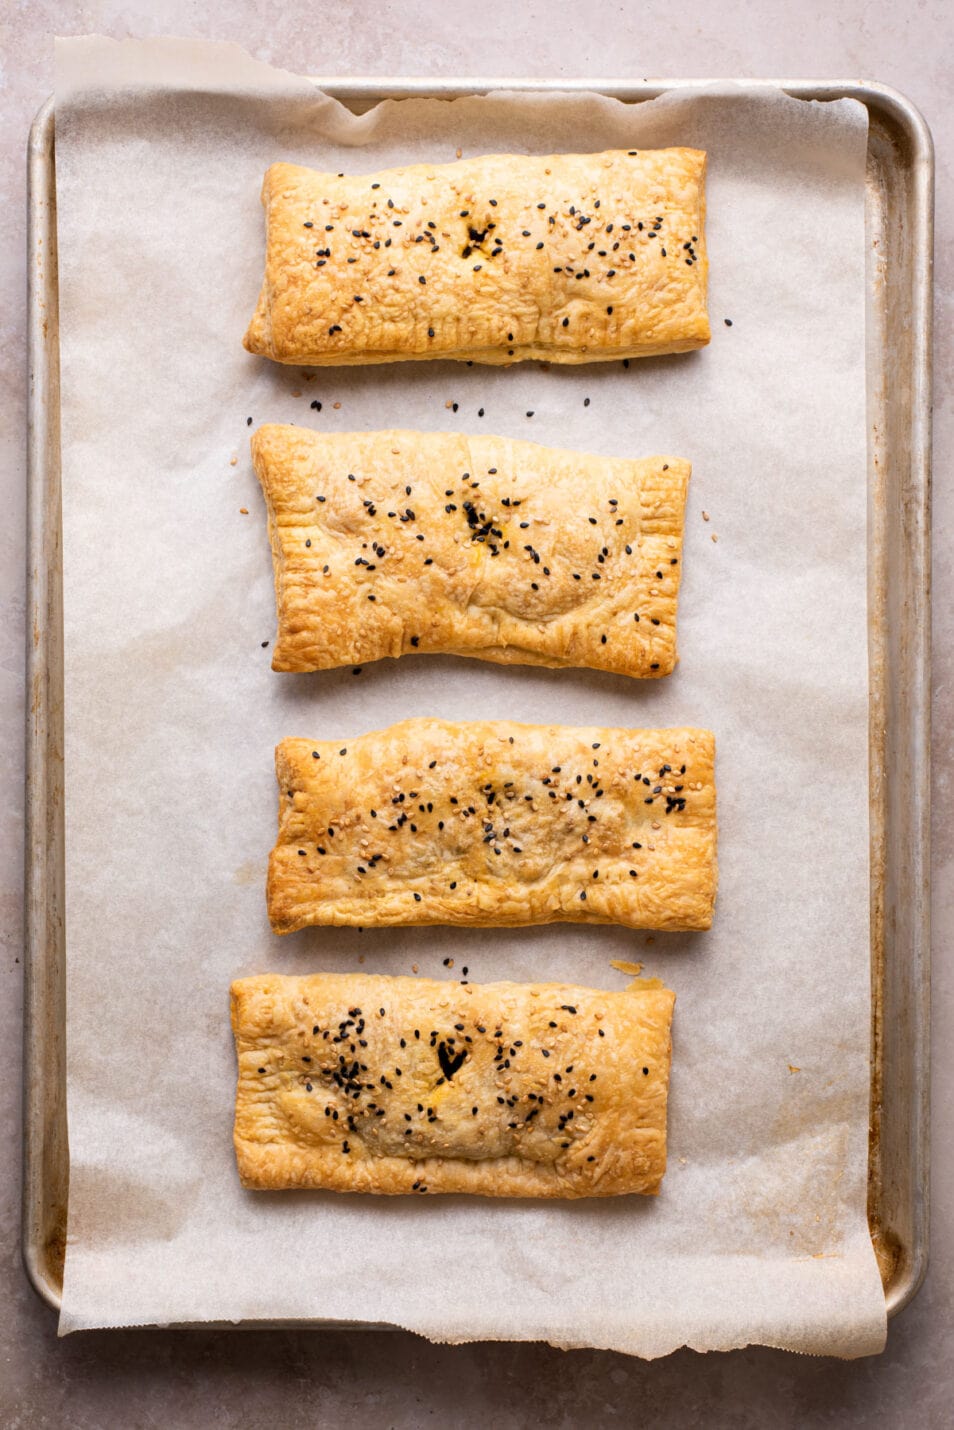 Vegan mushroom hand pies with puff pastry on a baking sheet.